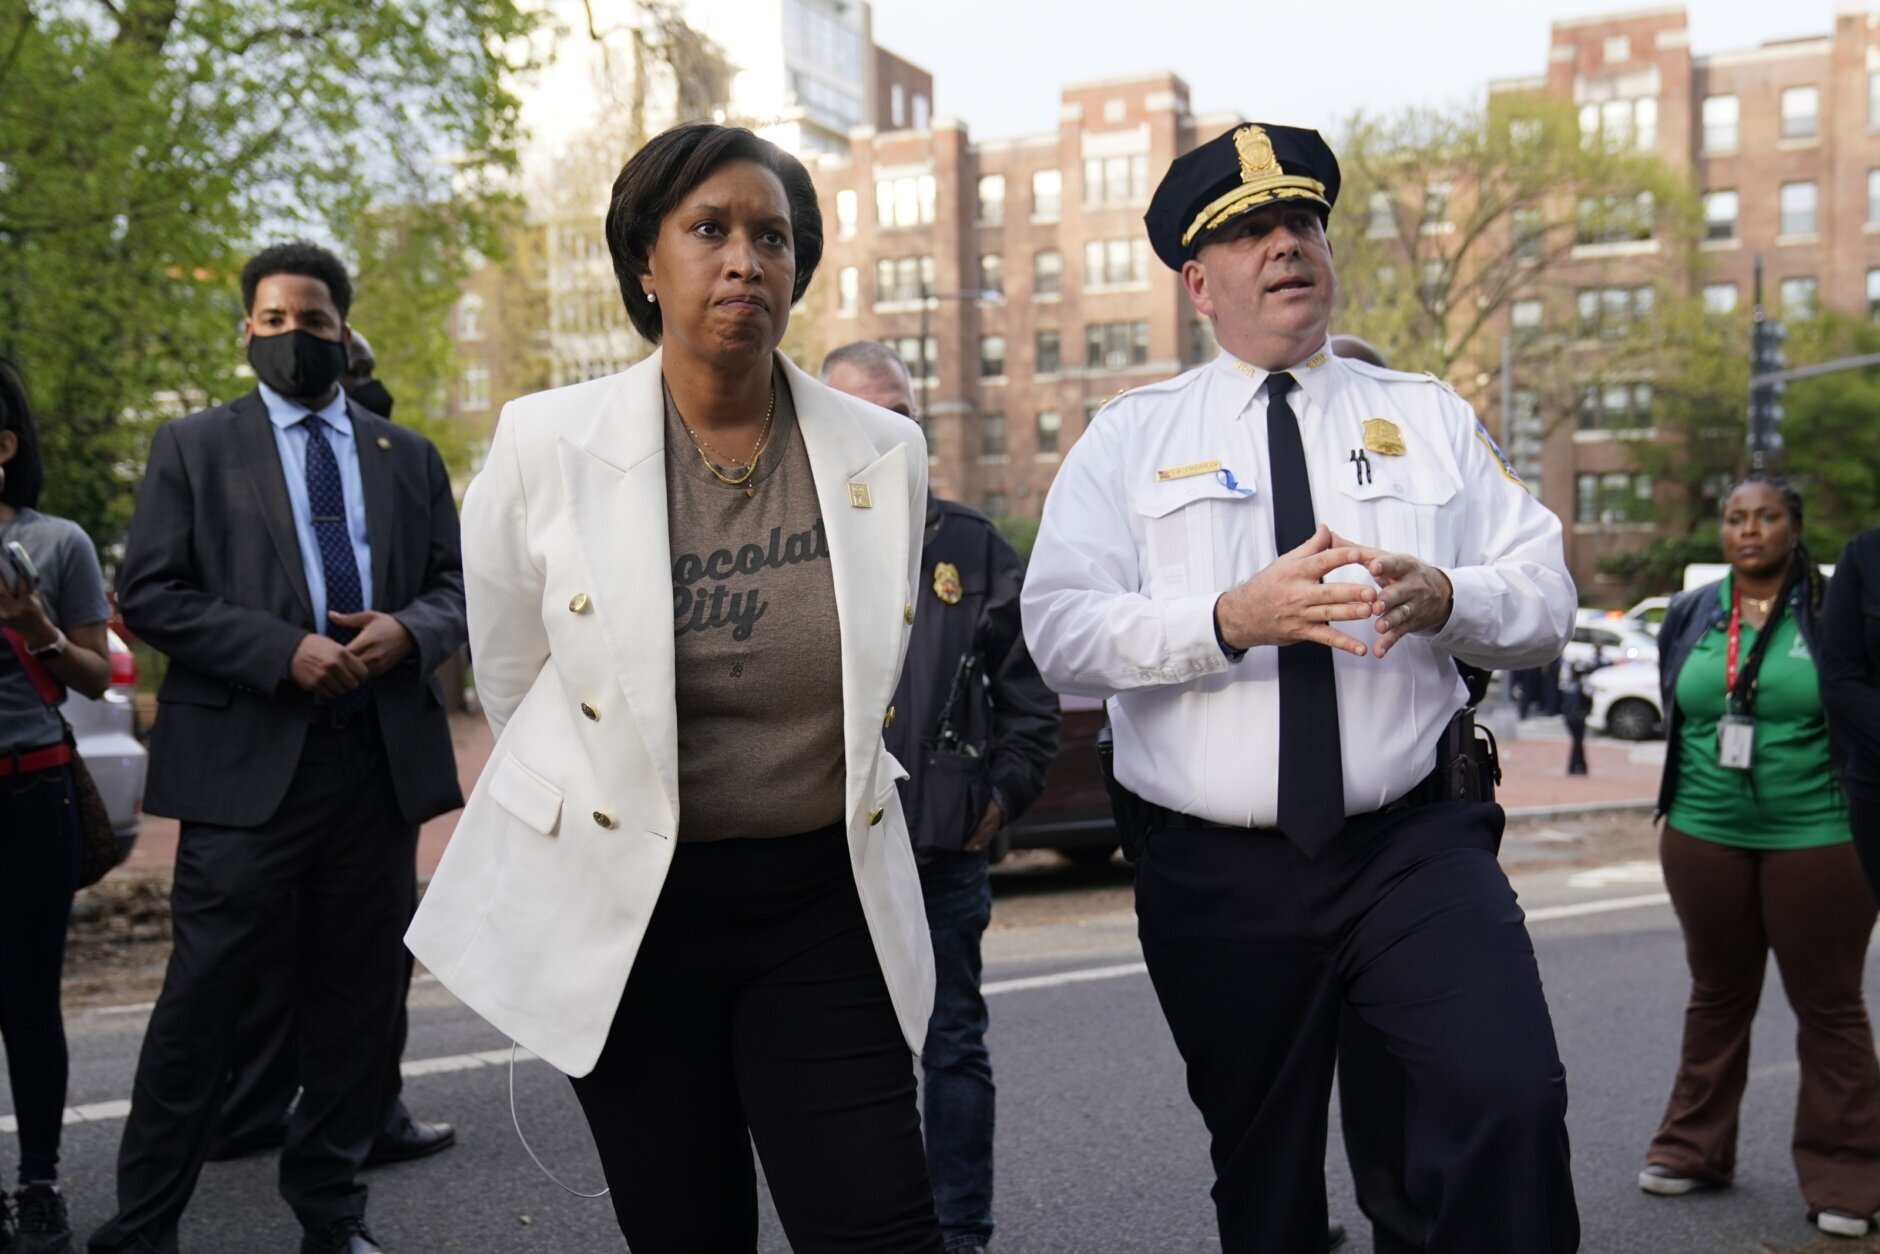 District of Columbia Mayor Muriel Bowser listens as Metropolitan Police Department assistant chief Stuart Emerman speaks near the scene of a shooting Friday, April 22, 2022, in northwest Washington. At least four people were shot when a gunman unleashed a flurry of bullets in the nation’s capital. The hail of gunfire led to lockdowns at several schools and left a community on edge before the suspect was found dead hours later.  (AP Photo/Carolyn Kaster)